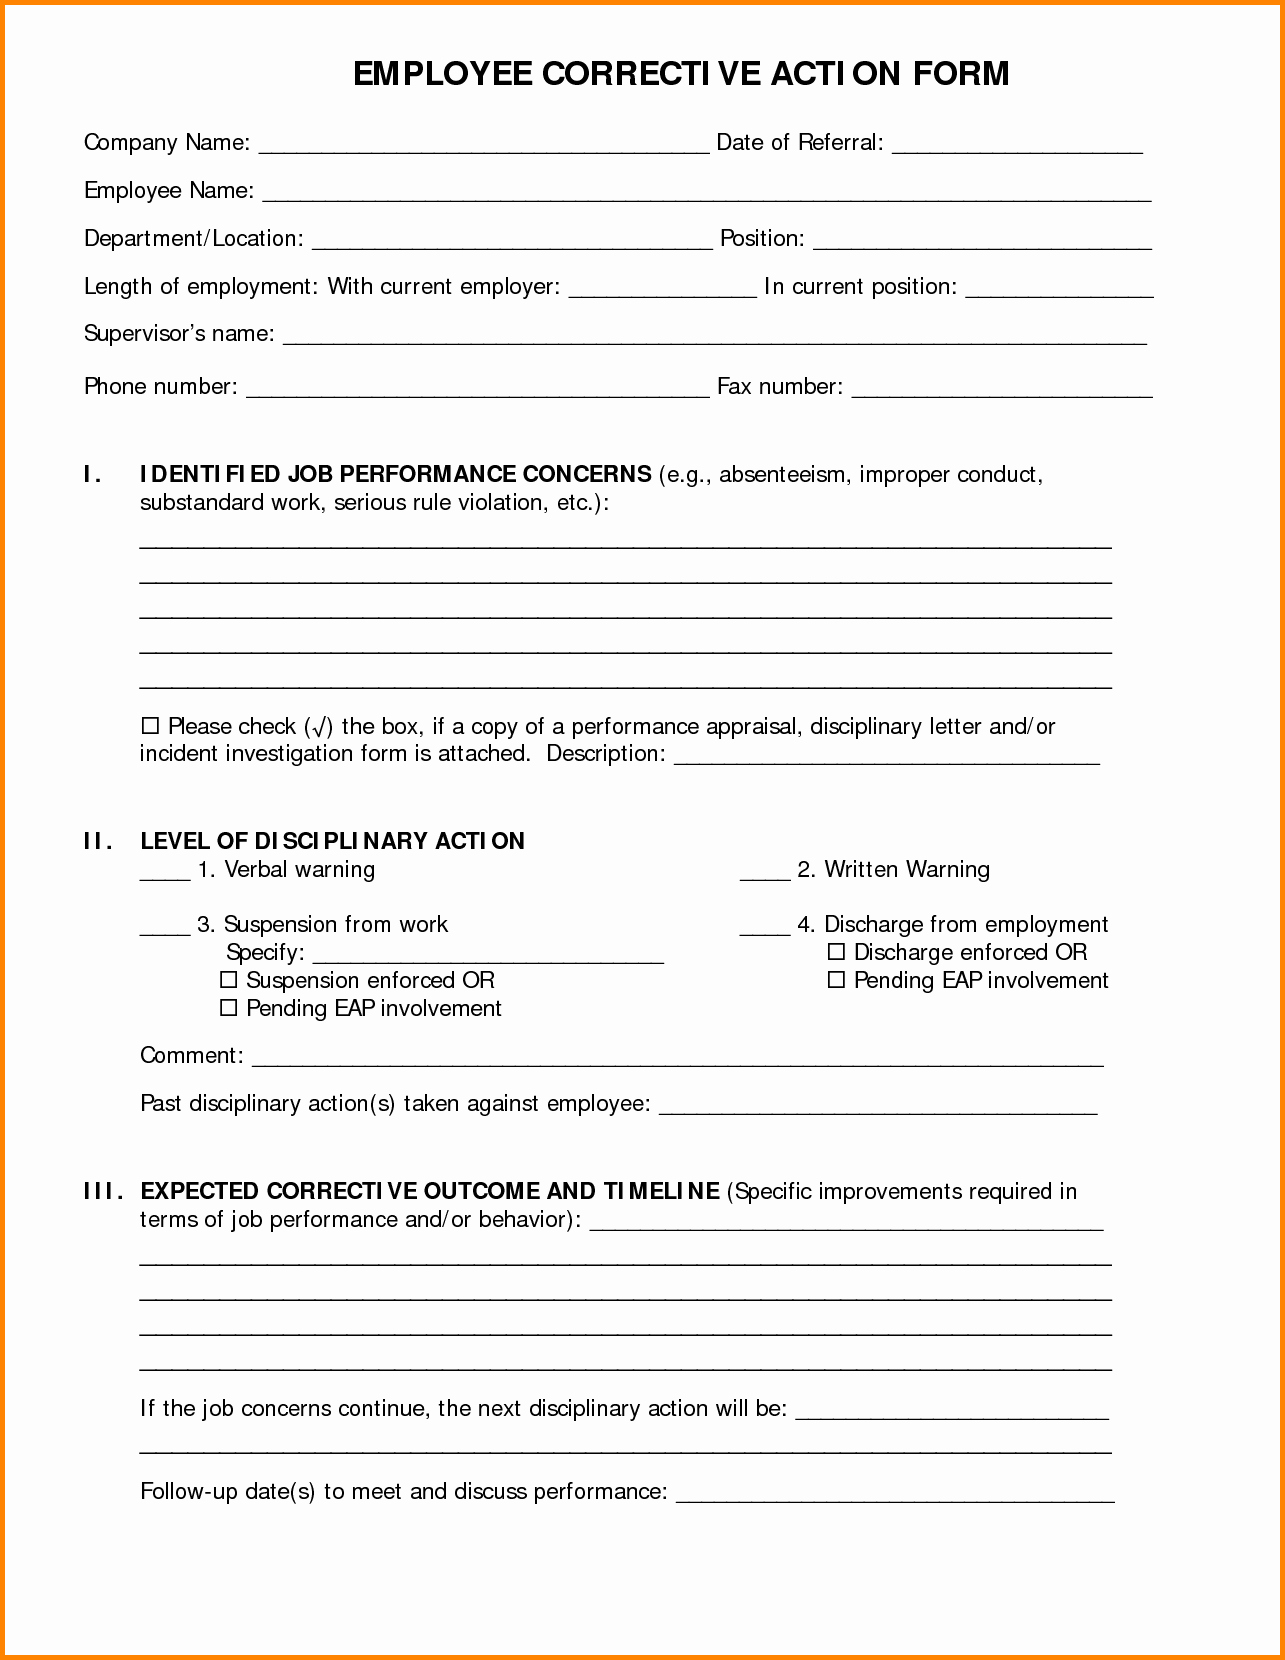 Employee Corrective Action form Template Awesome Employee Corrective Action form